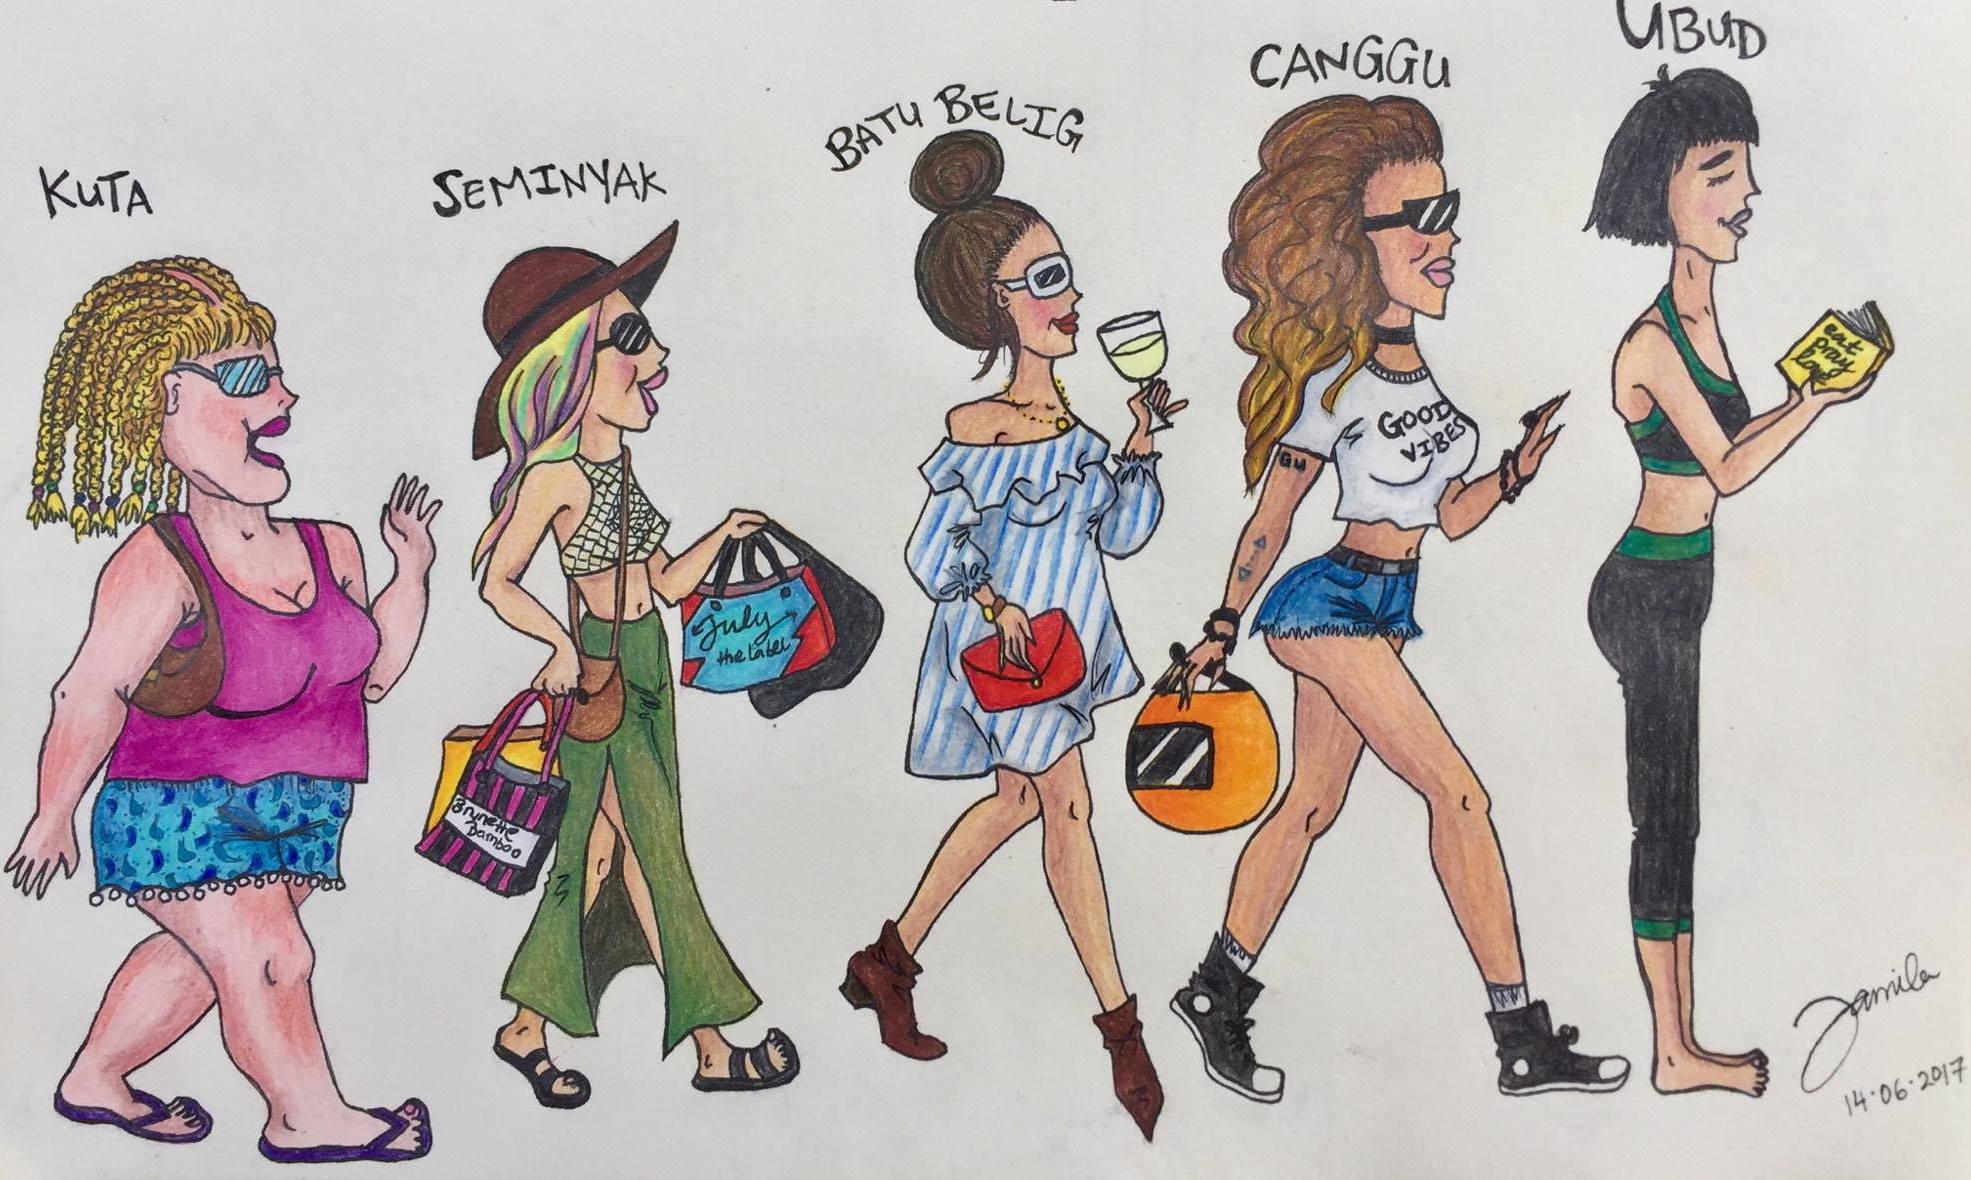 After the popularity of her original sketch, the artist decided to follow up with ‘The Evolution of Bali’, ladies edition. Drawing by Mila Gerber